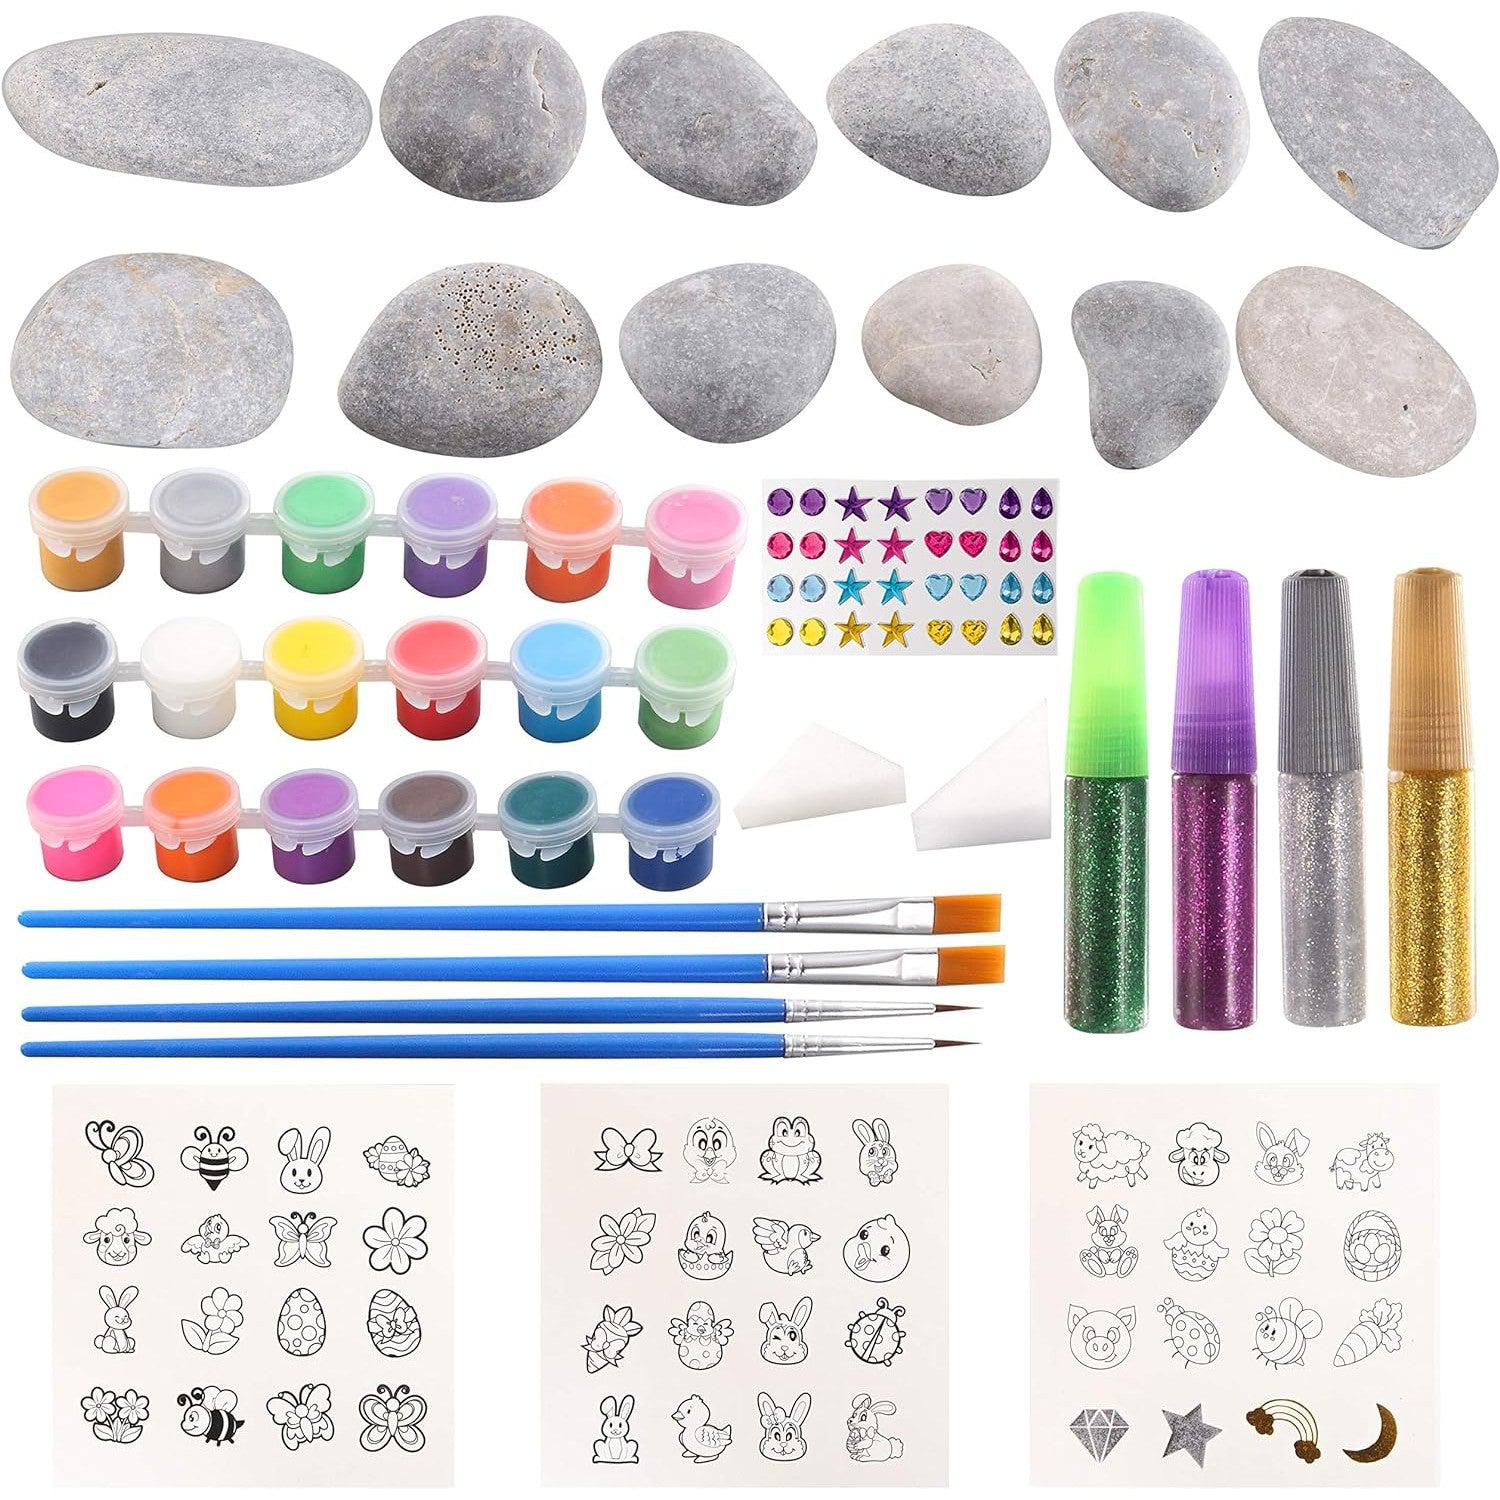 Easter Themed Rock Painting Kit